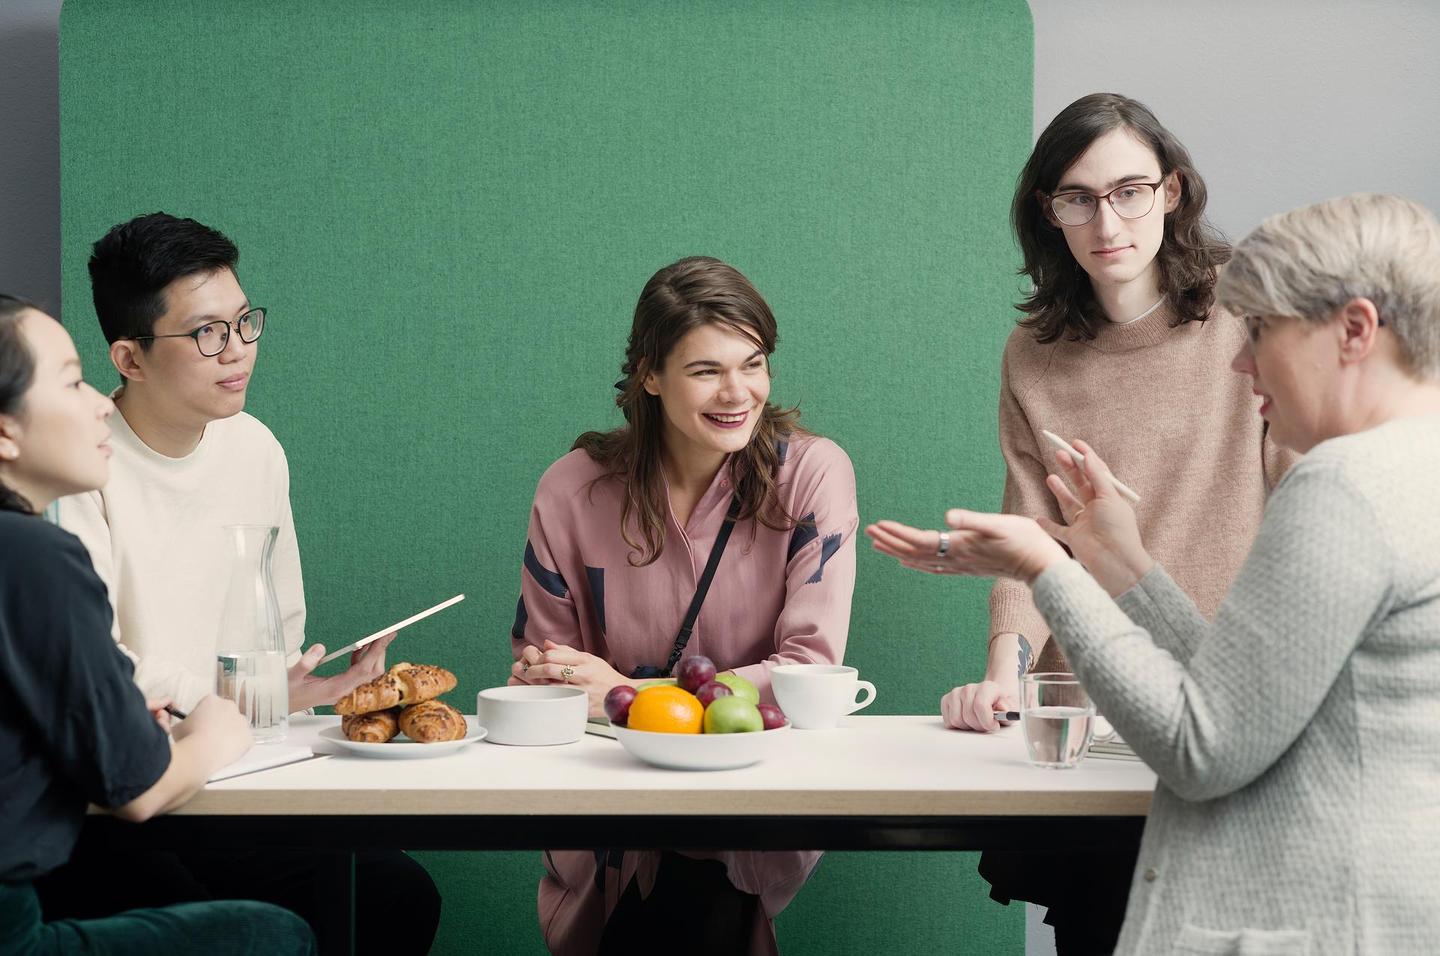 A diverse group of five is having an engaging conversation in the office. They are standing at a table in front of a green wall.